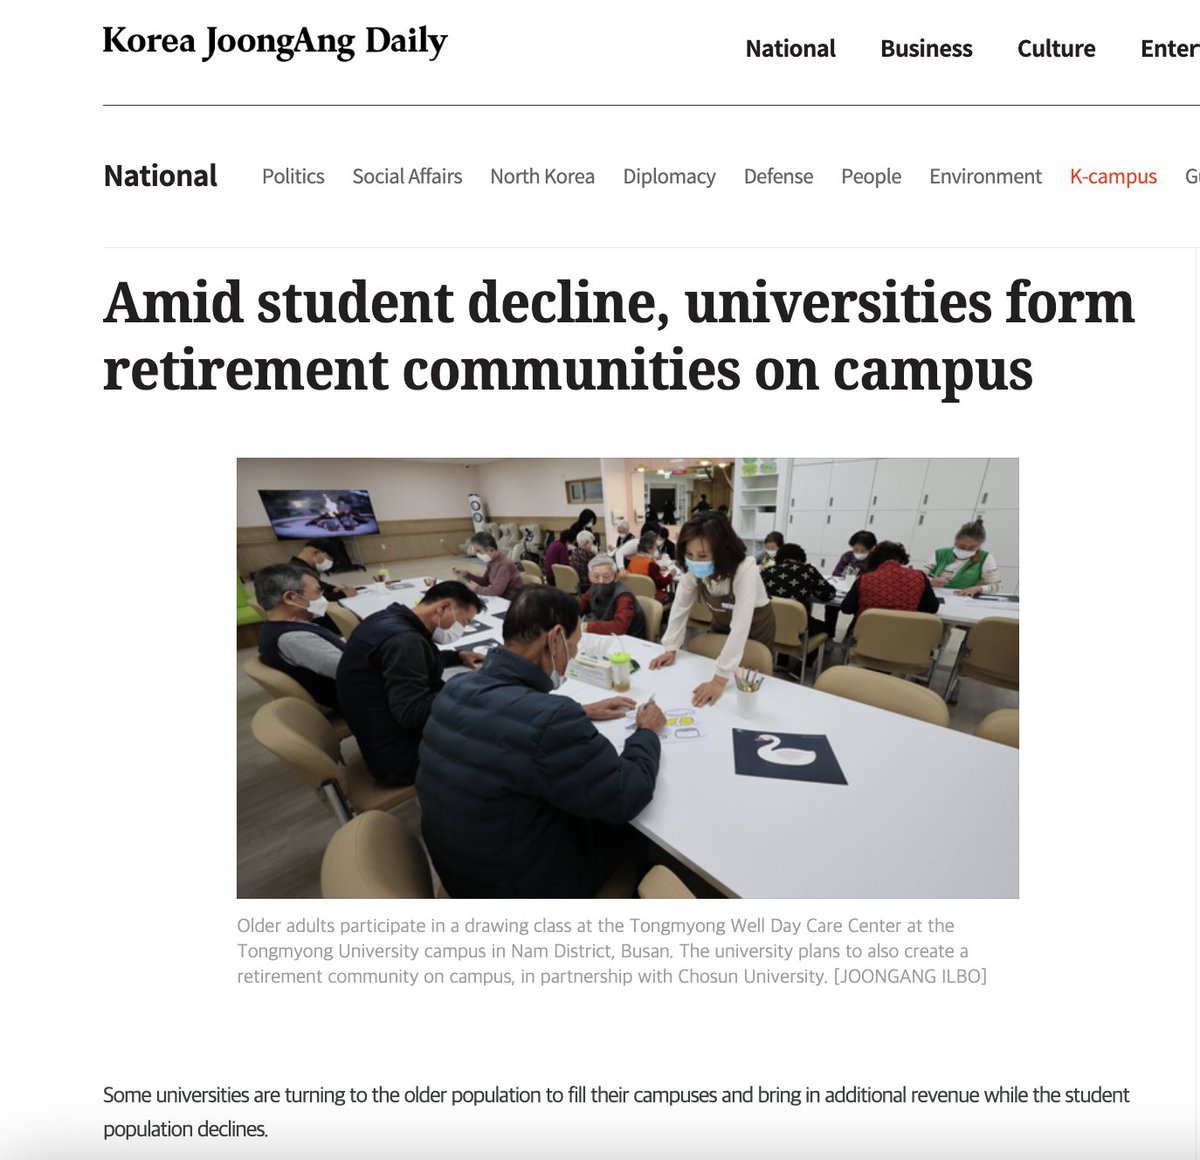 Korean universities converting to retirement communities. Live in dorms, take classes. Good idea. Might be future for dying US colleges, too?